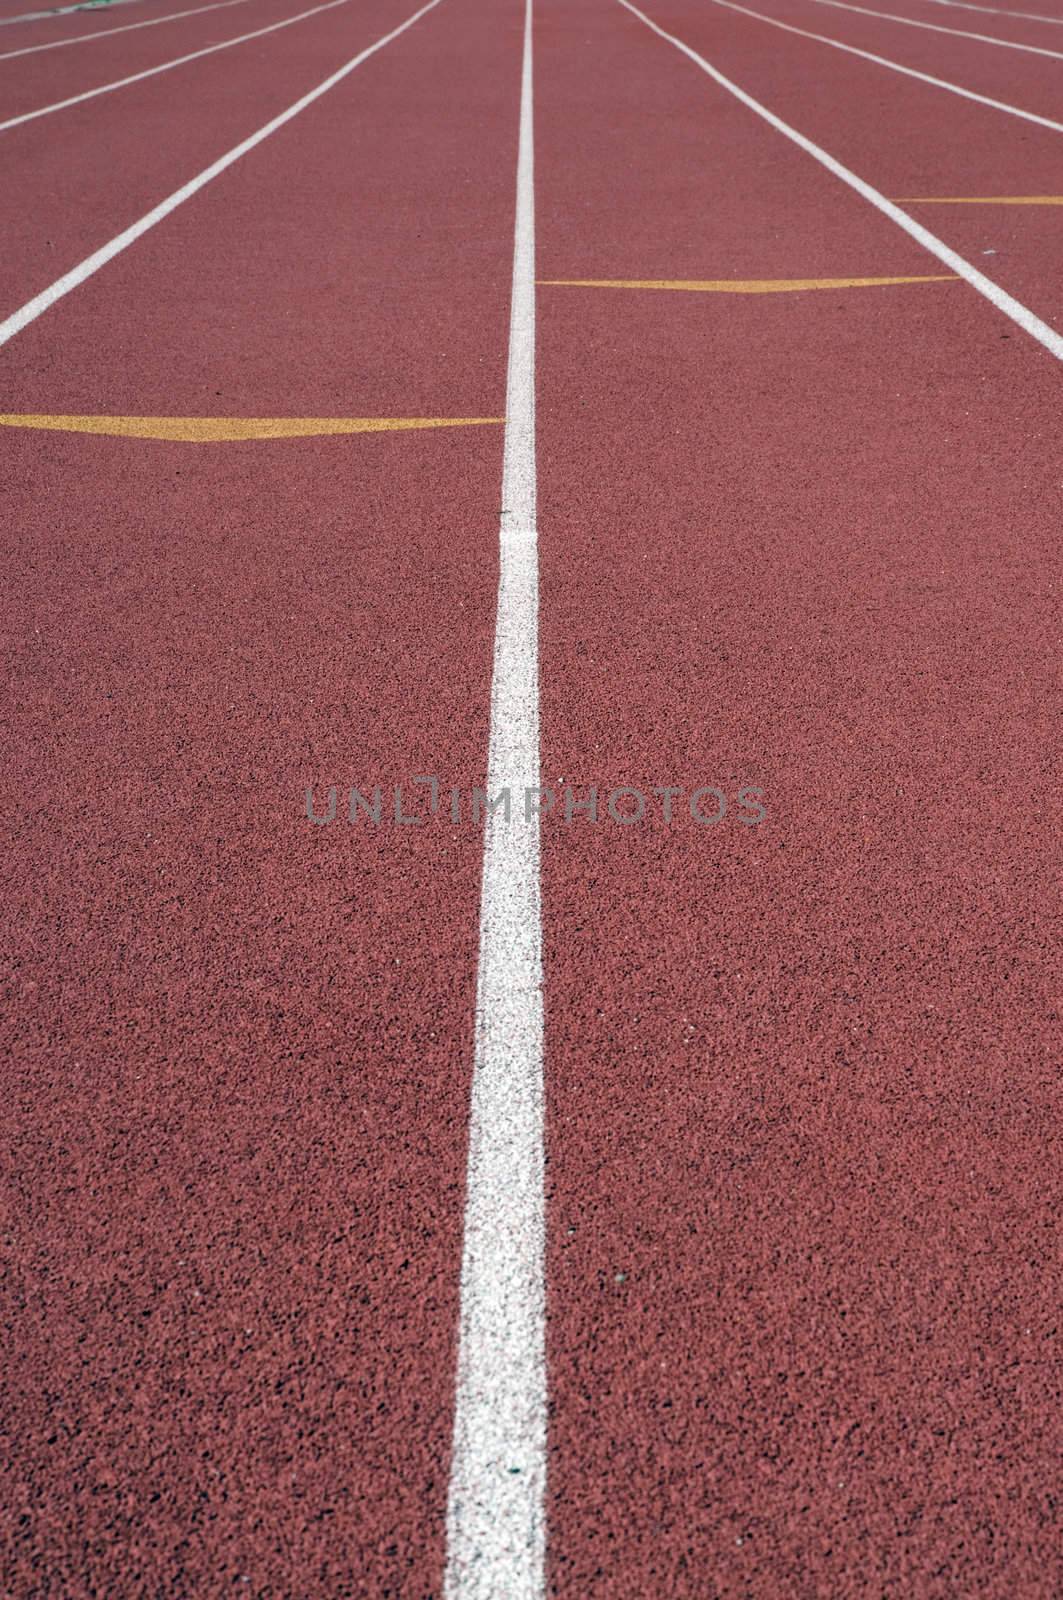 Track and Field running lanes by PDImages